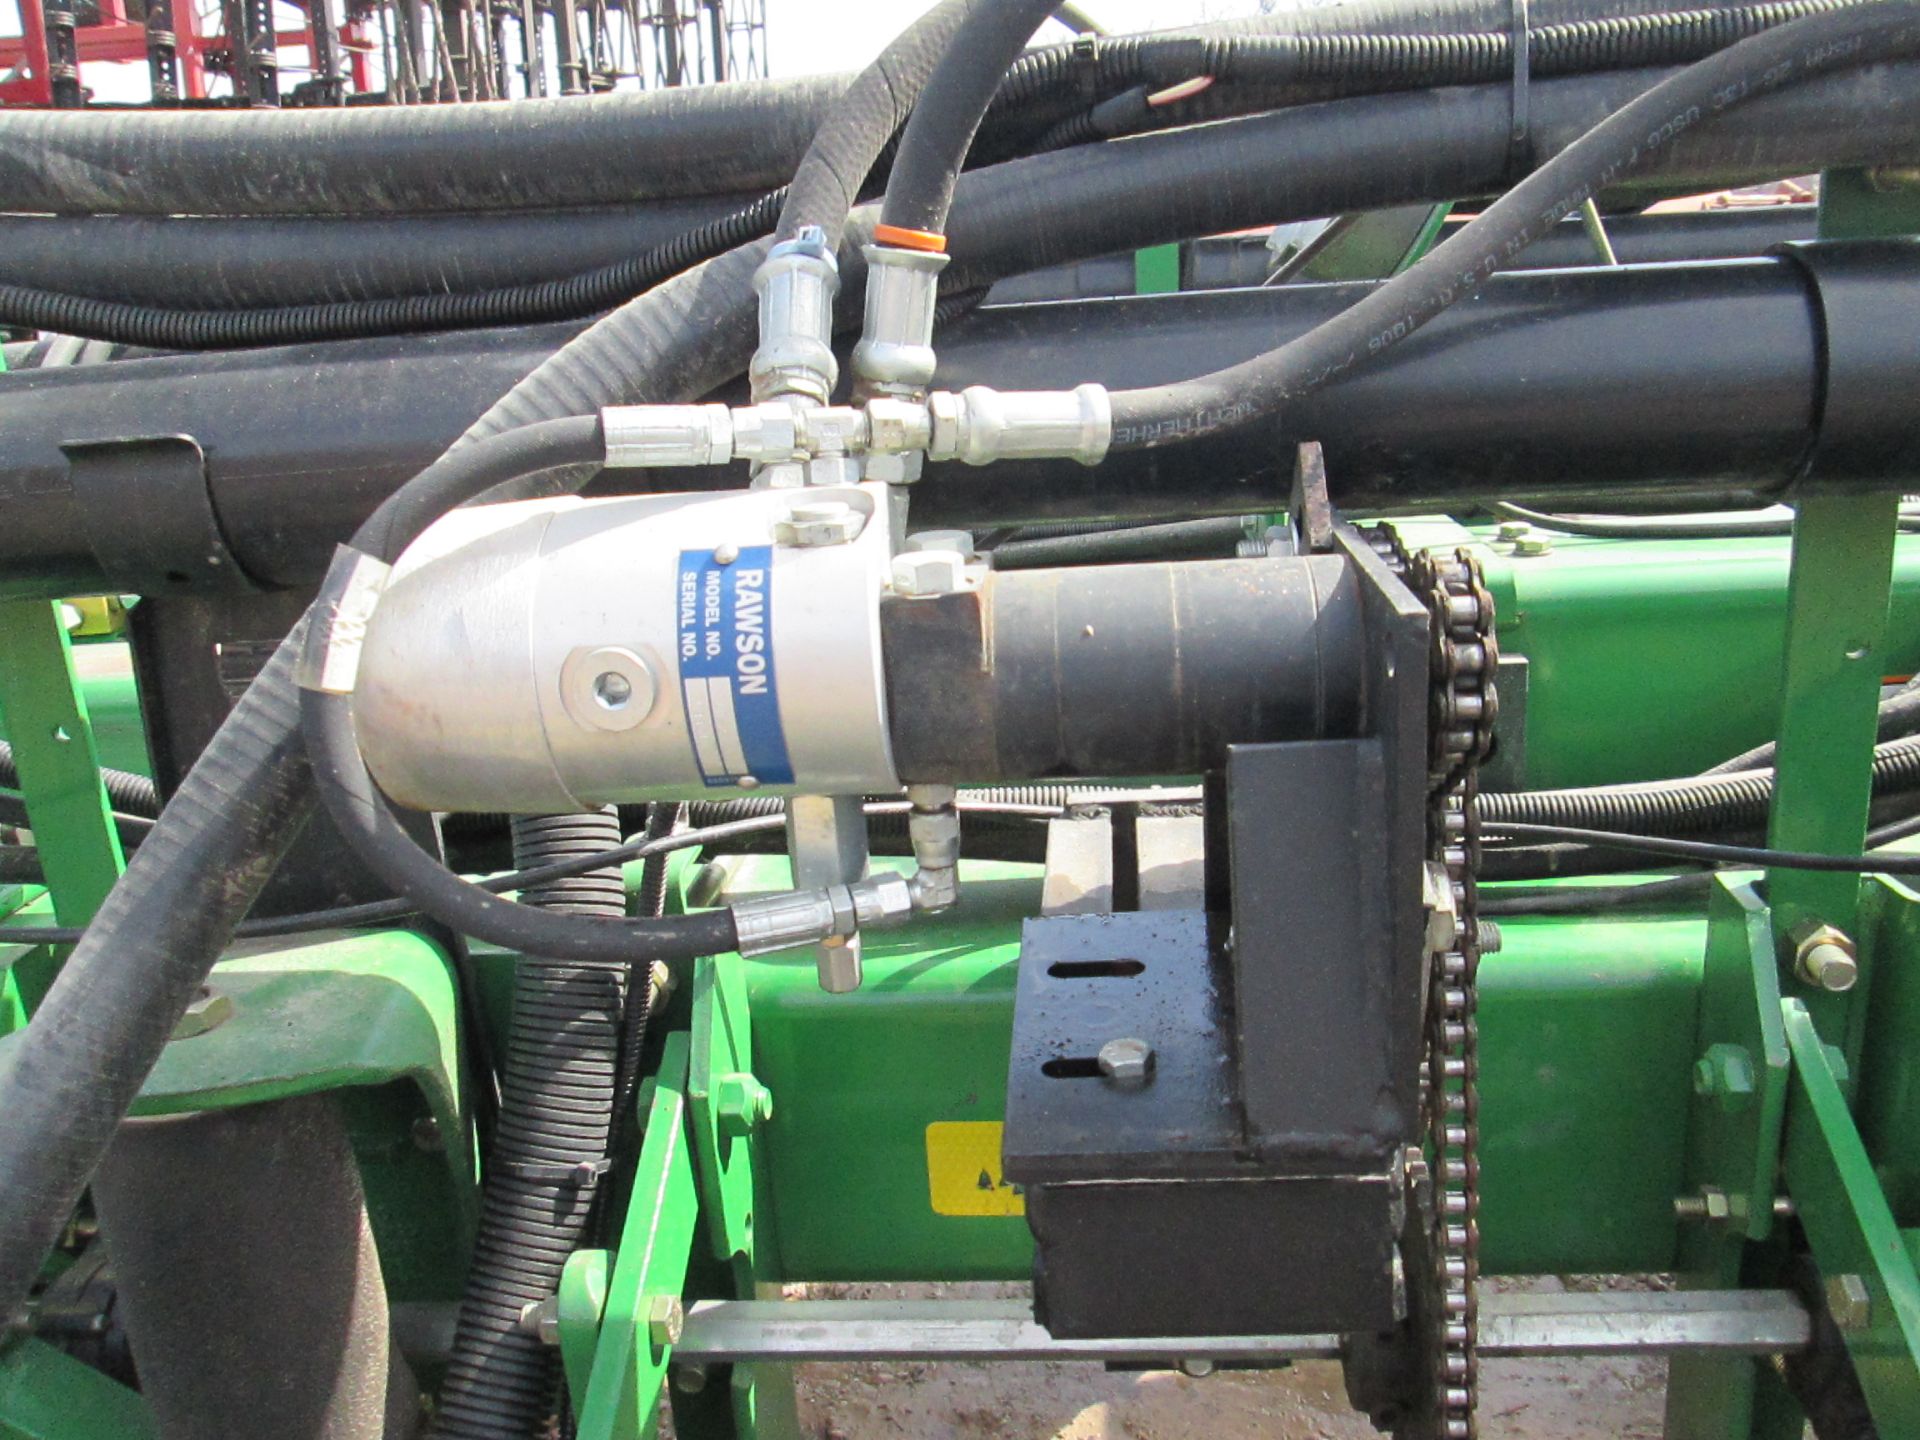 ’06 JD 1770 NT 16R30 PLANTER, CCS,HYDR DRIVE, TRASH WHIPPERS, AG LEADER SHUT OFFS, E-SETS - Image 9 of 16